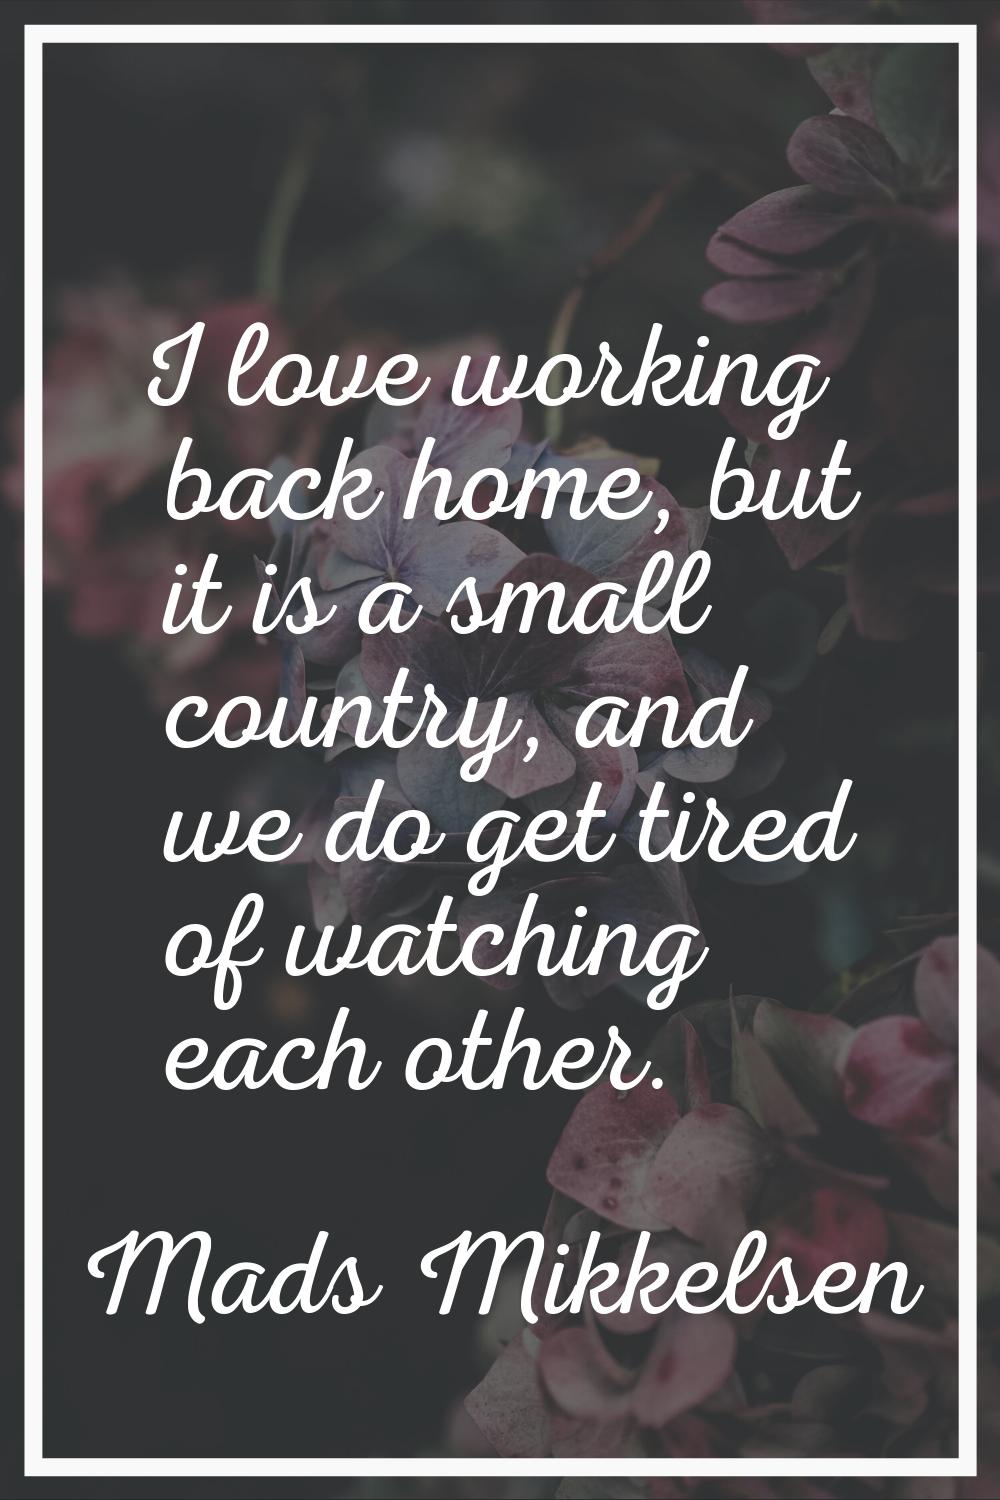 I love working back home, but it is a small country, and we do get tired of watching each other.